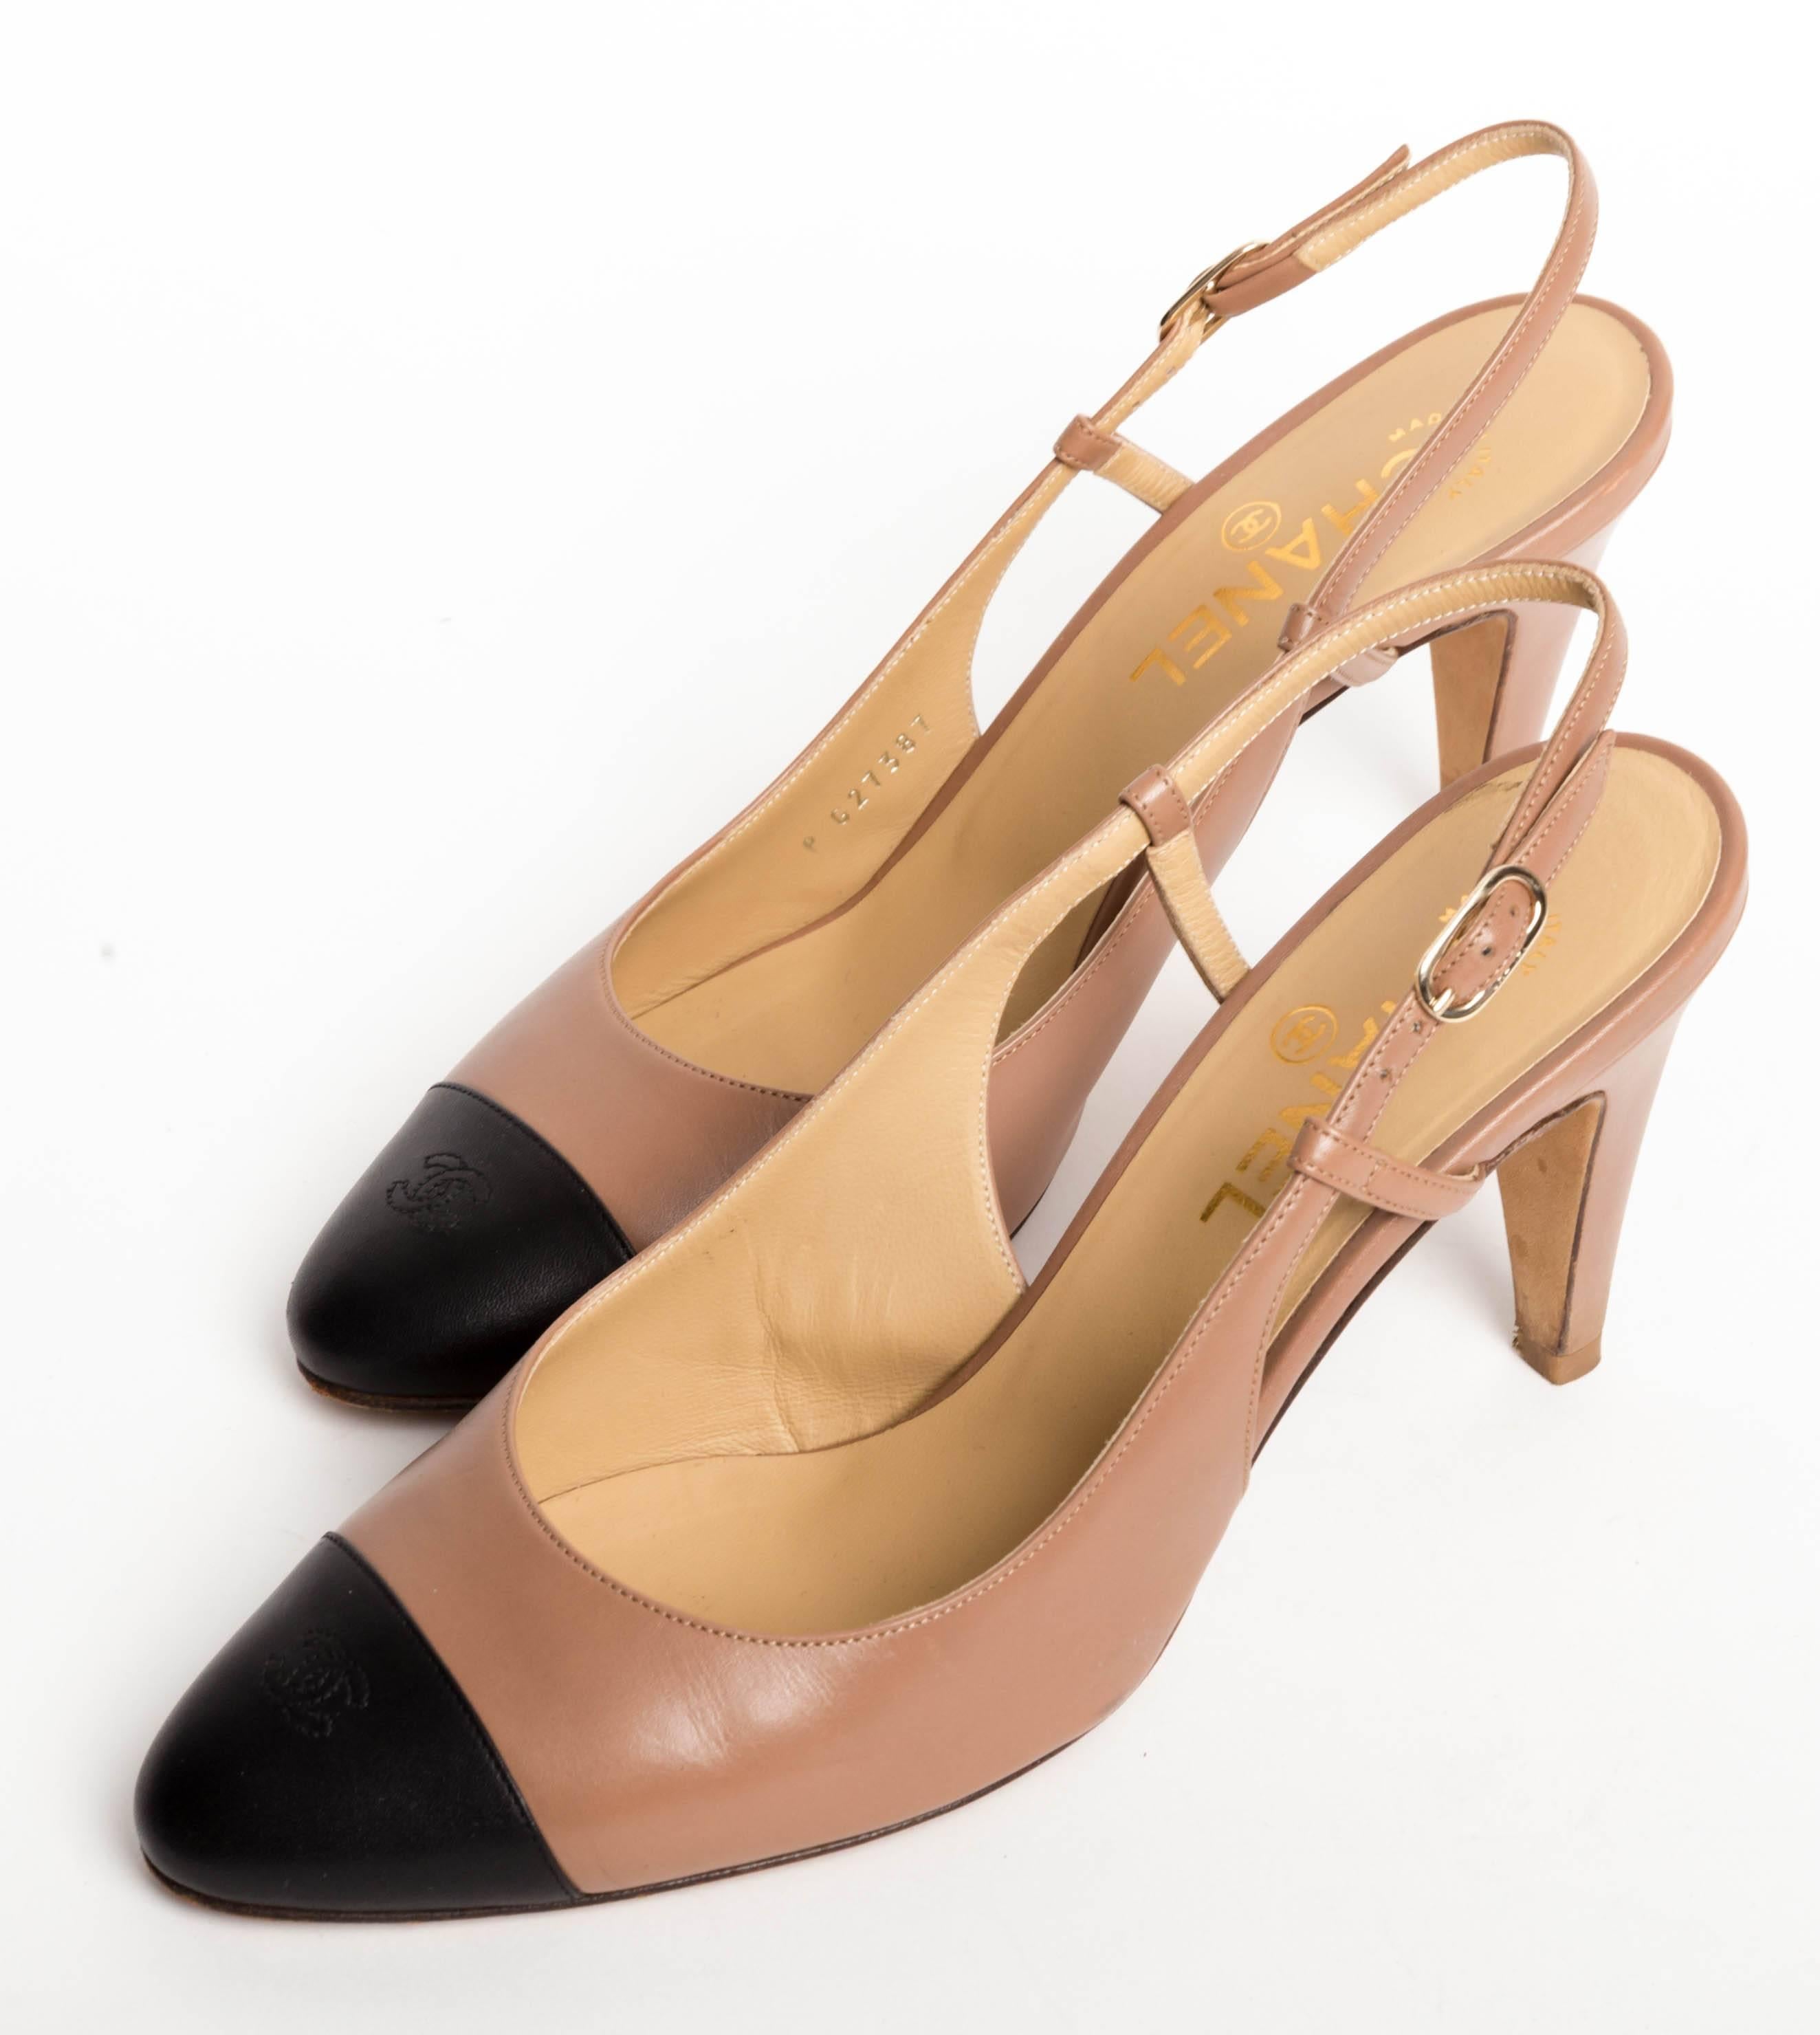 Chanel Brown and Black Slingback Pumps
Wear to Soles Otherwise Excellent Condition